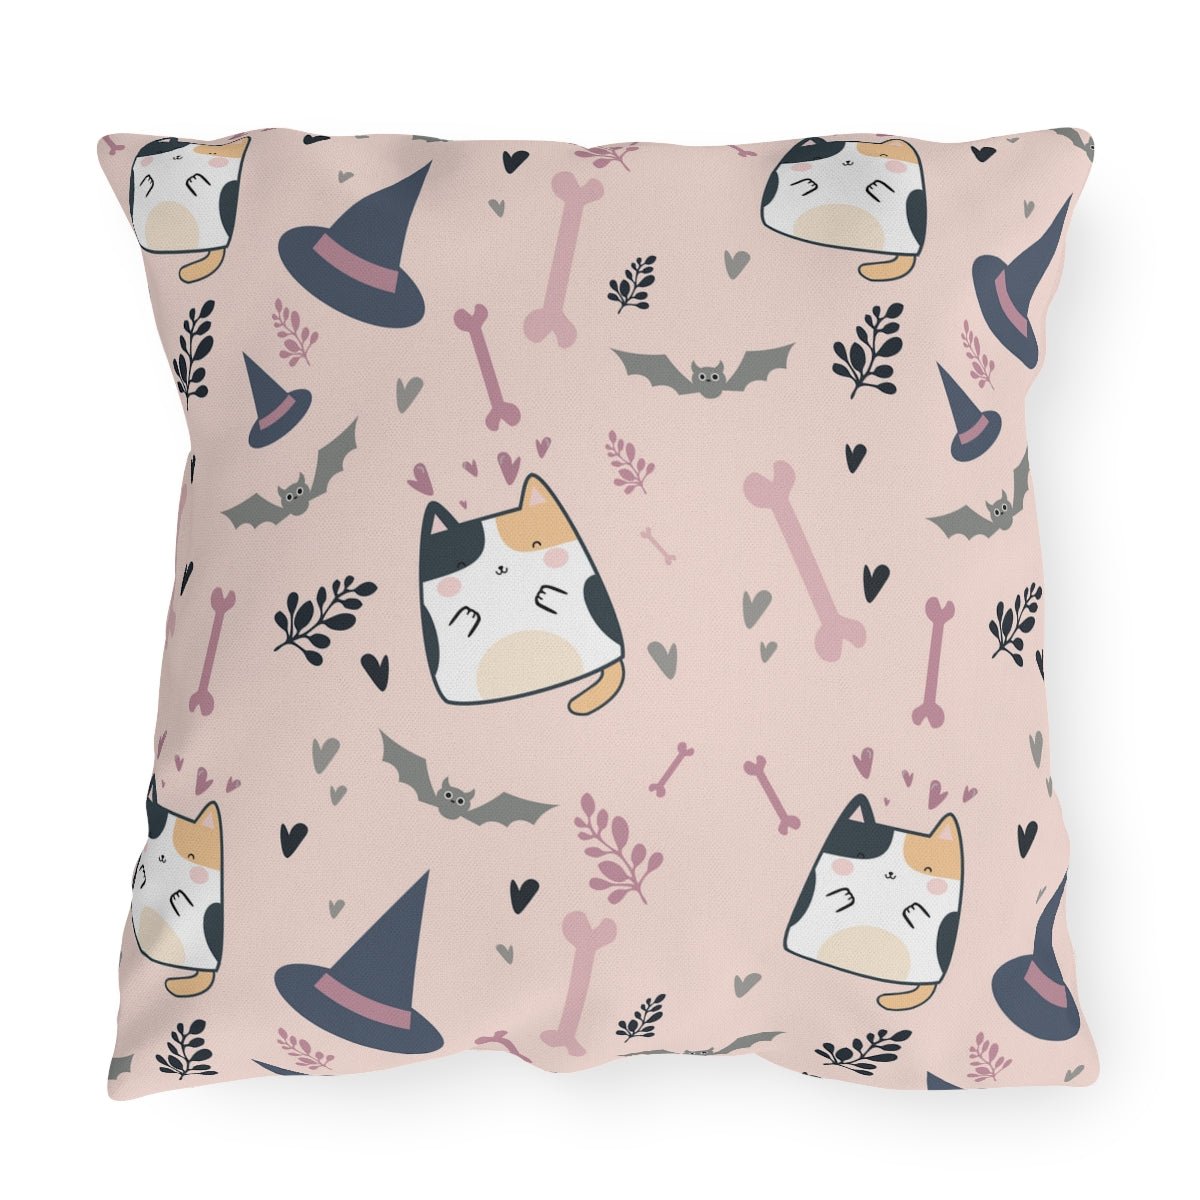 Halloween Cats and Bats Outdoor Pillows - Puffin Lime